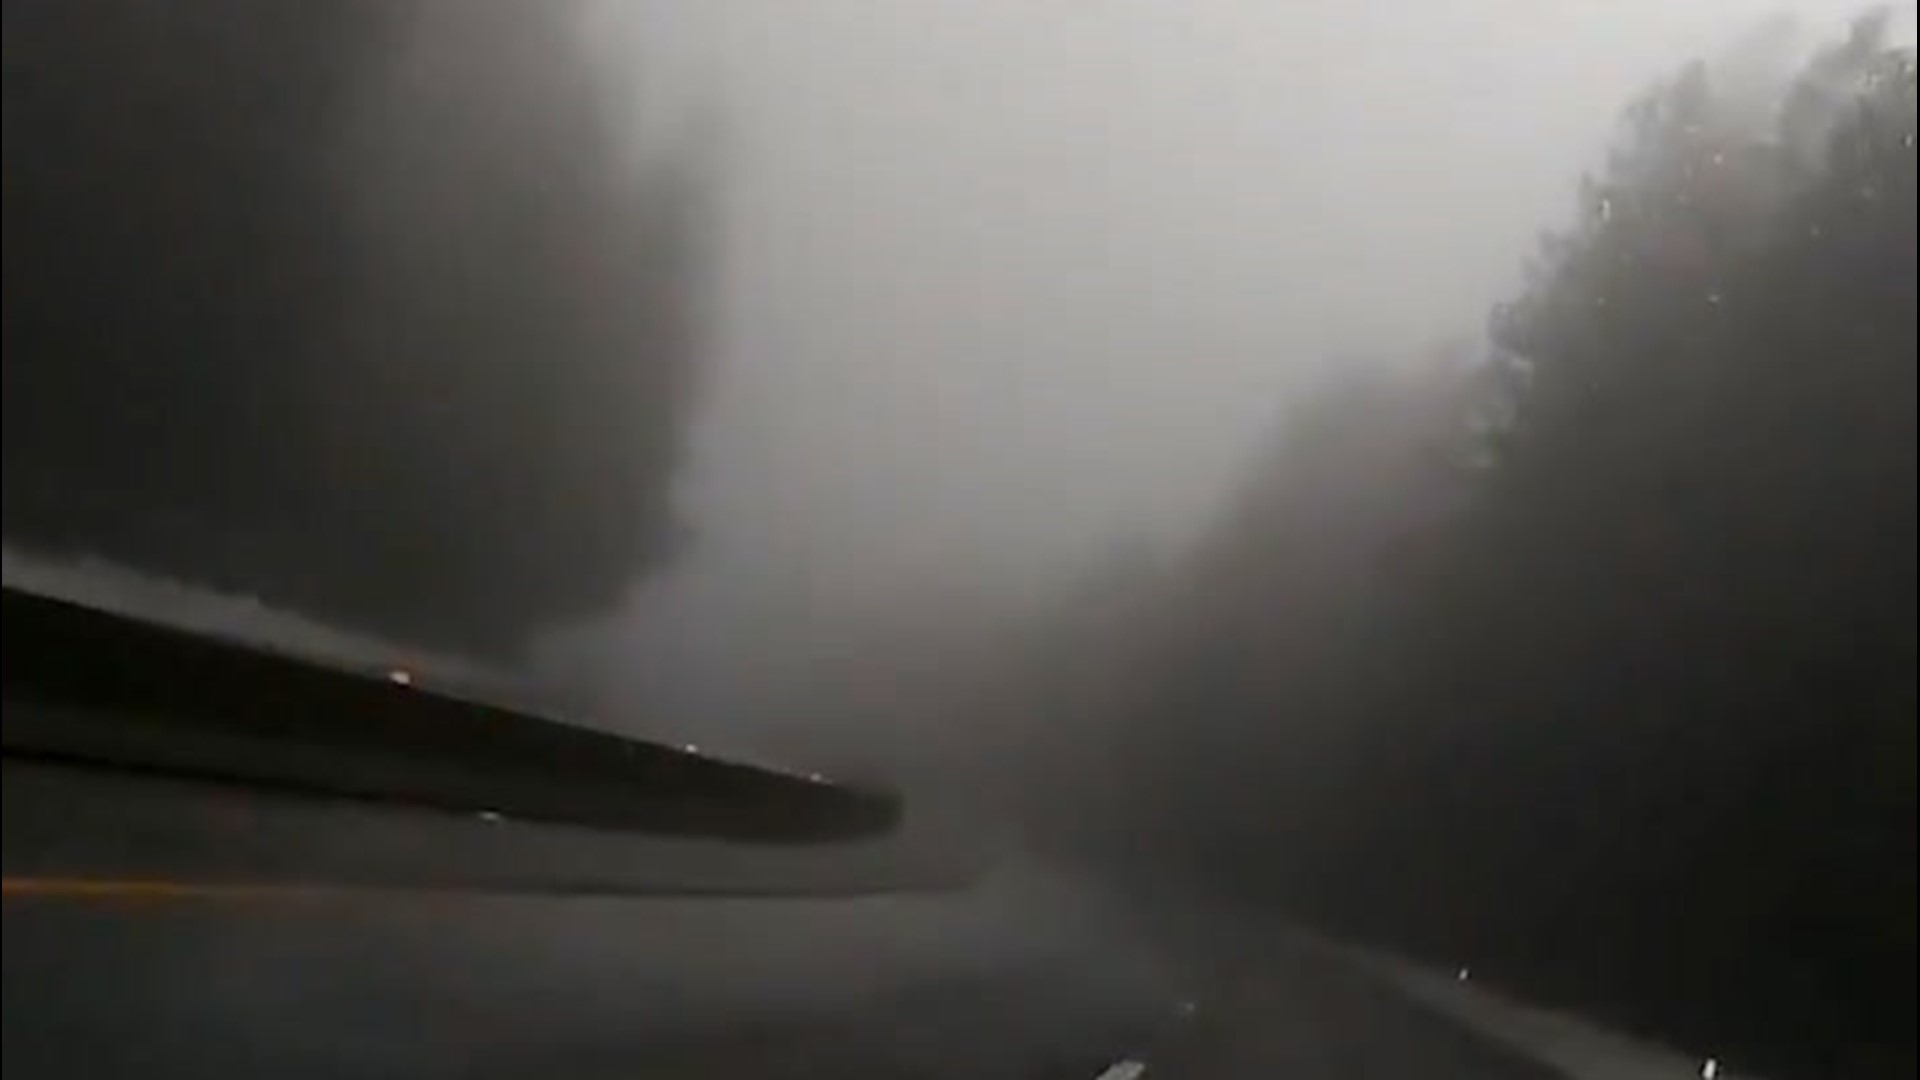 This early-morning commute in Placerville, California, on April 9, was described as having the feeling of 'Silent Hill' by the driver due to the fog.